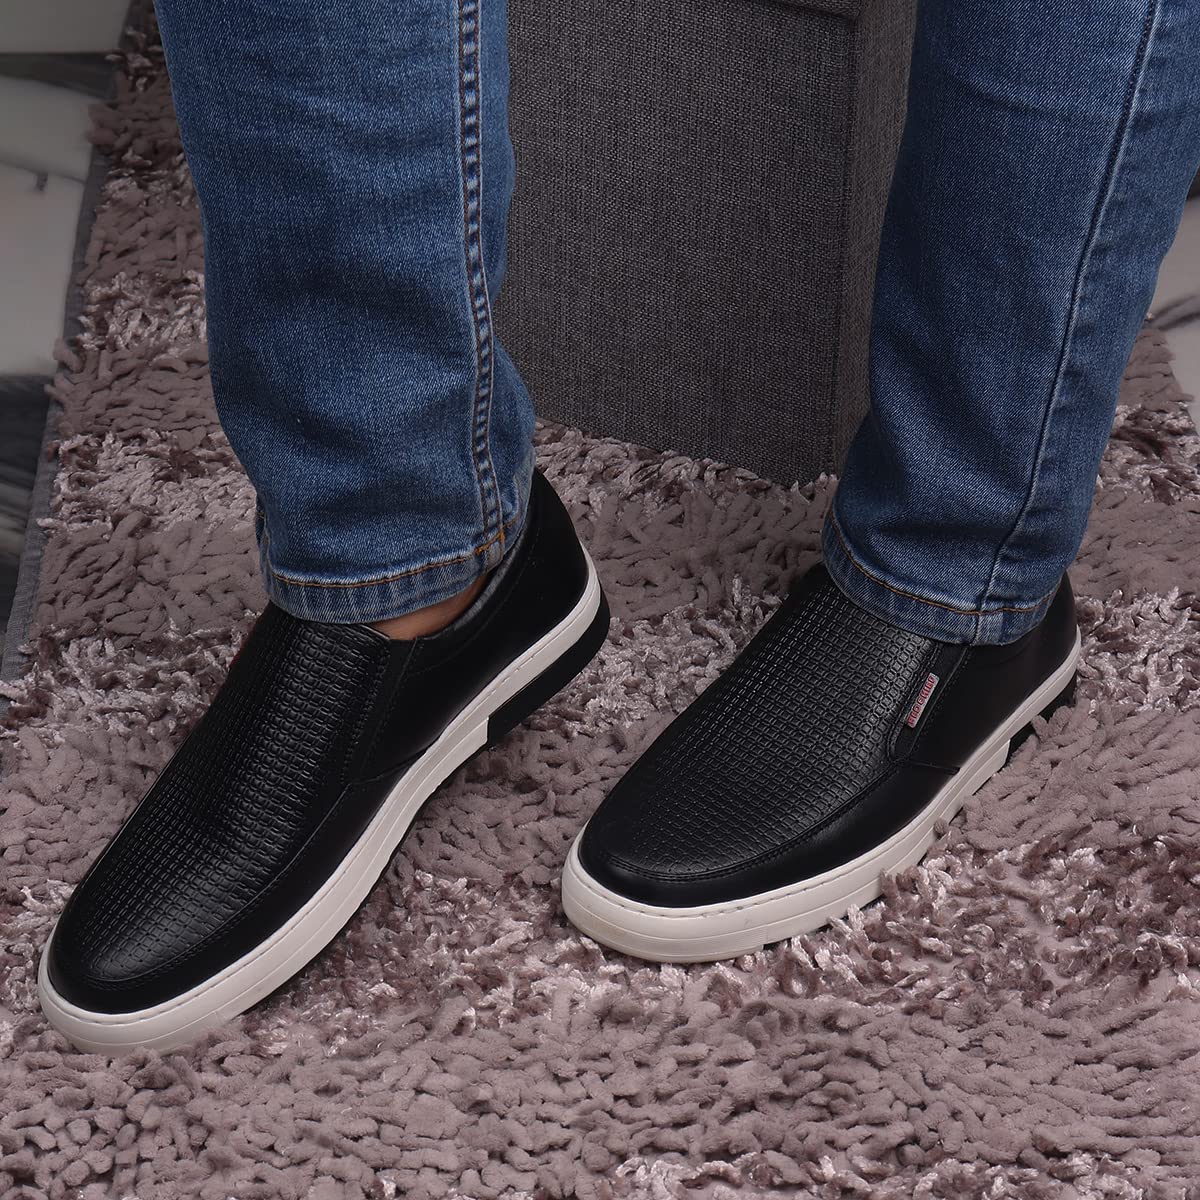 Red Chief Black Leather Slip on Sneakers for Men